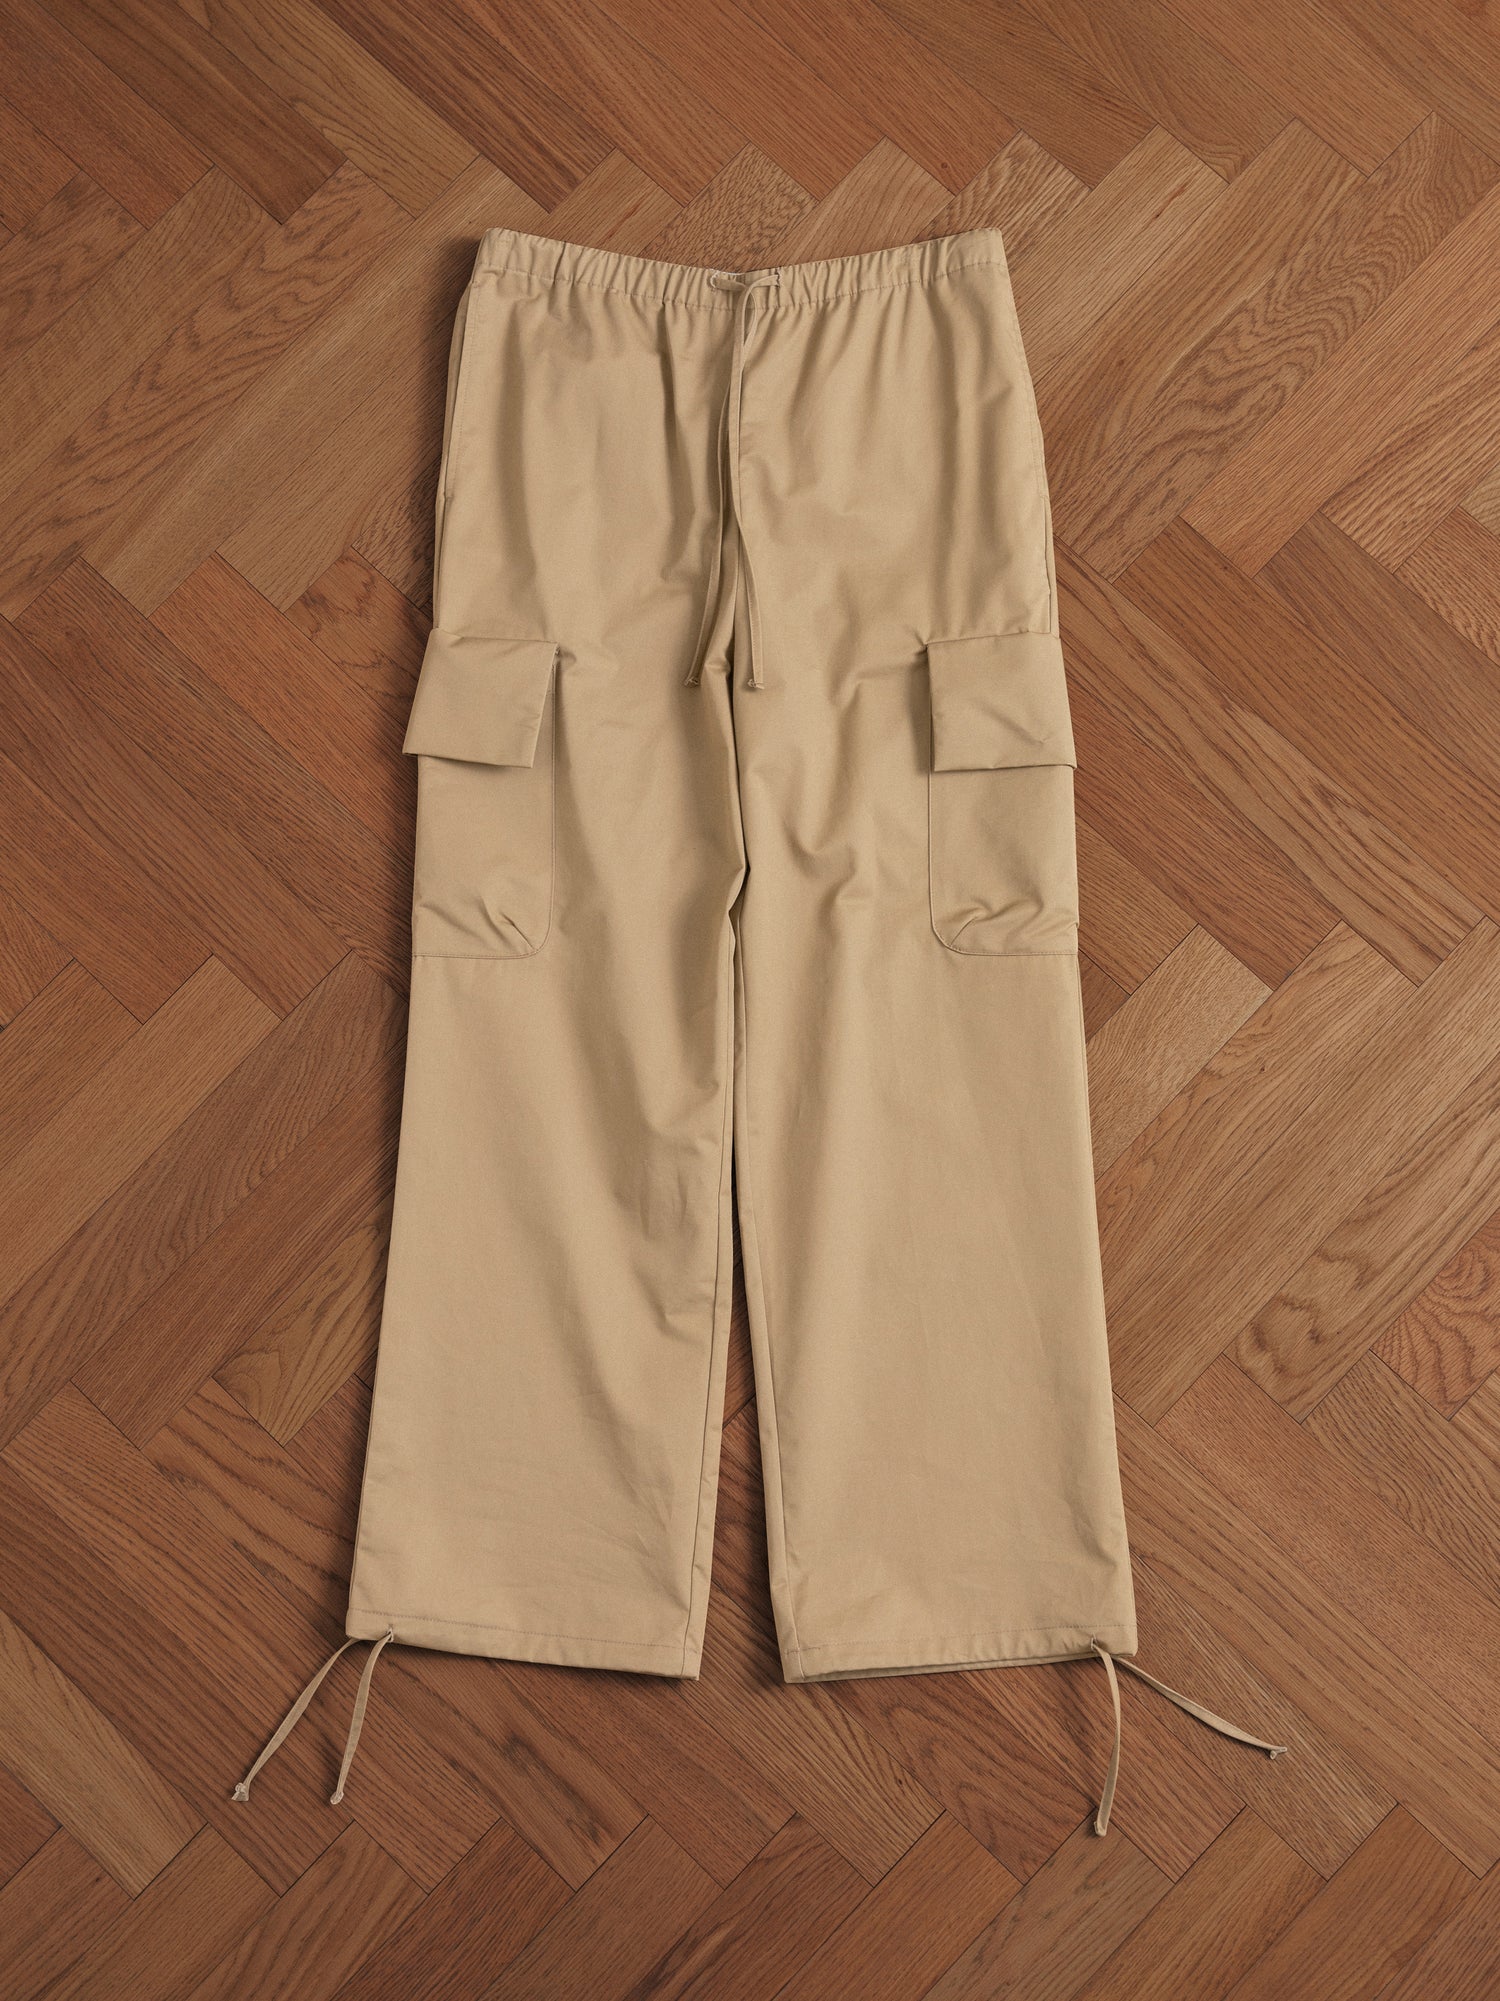 A pair of Found Twill Cargo Drawstring Pants in tan on a wooden floor.